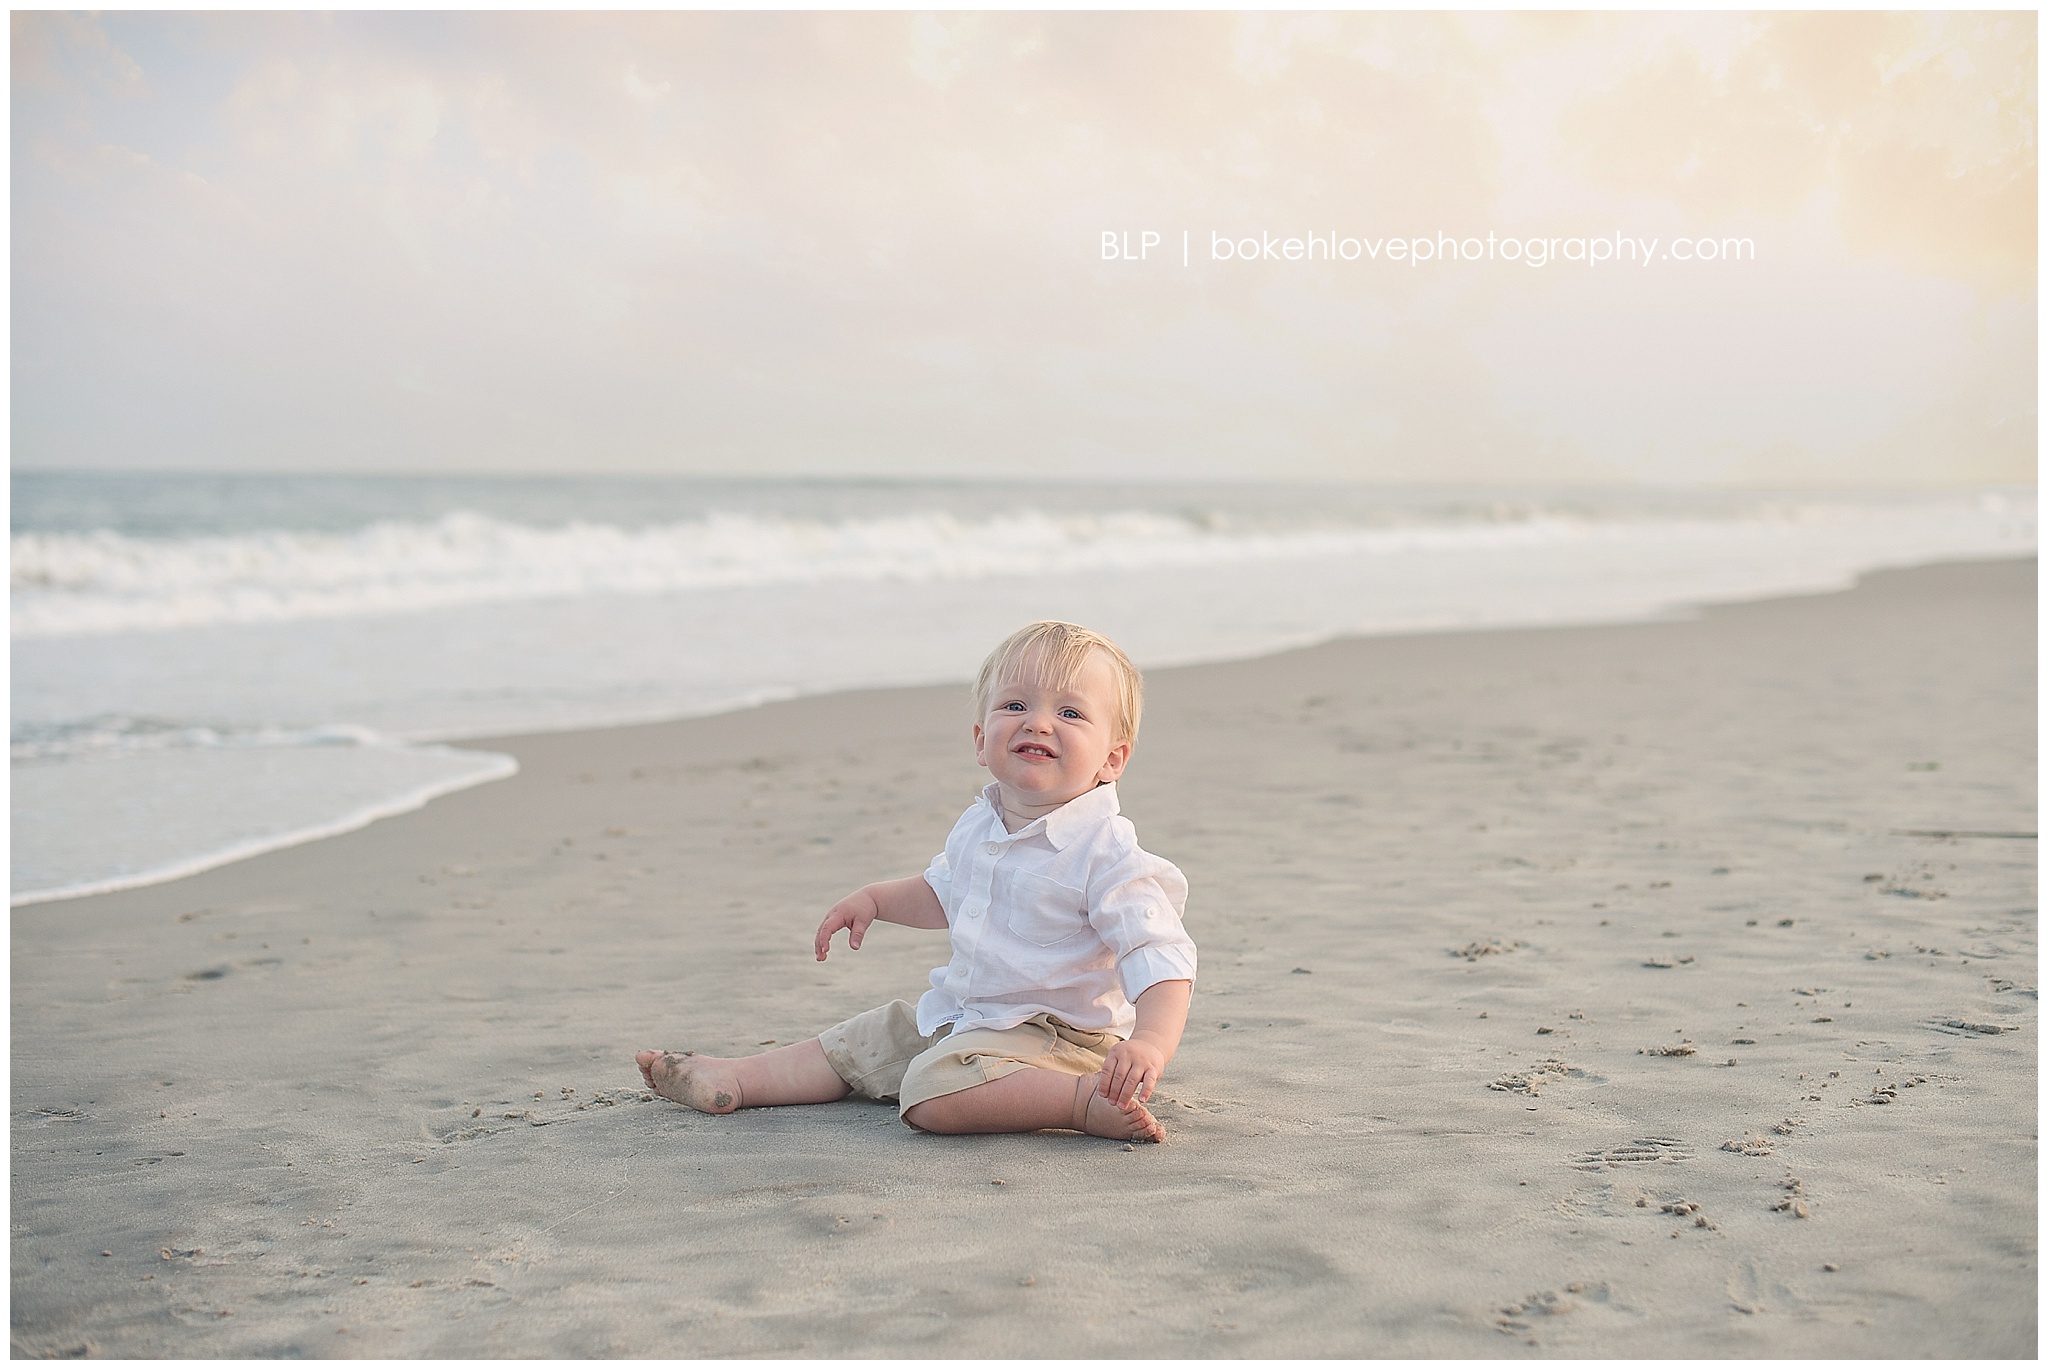 bokeh love photography, Beach Portraits in your favorite Jersey Shore town, south jersey beach photographer, ocean city beach photographer, ventnor beach photographer, family beach photographer